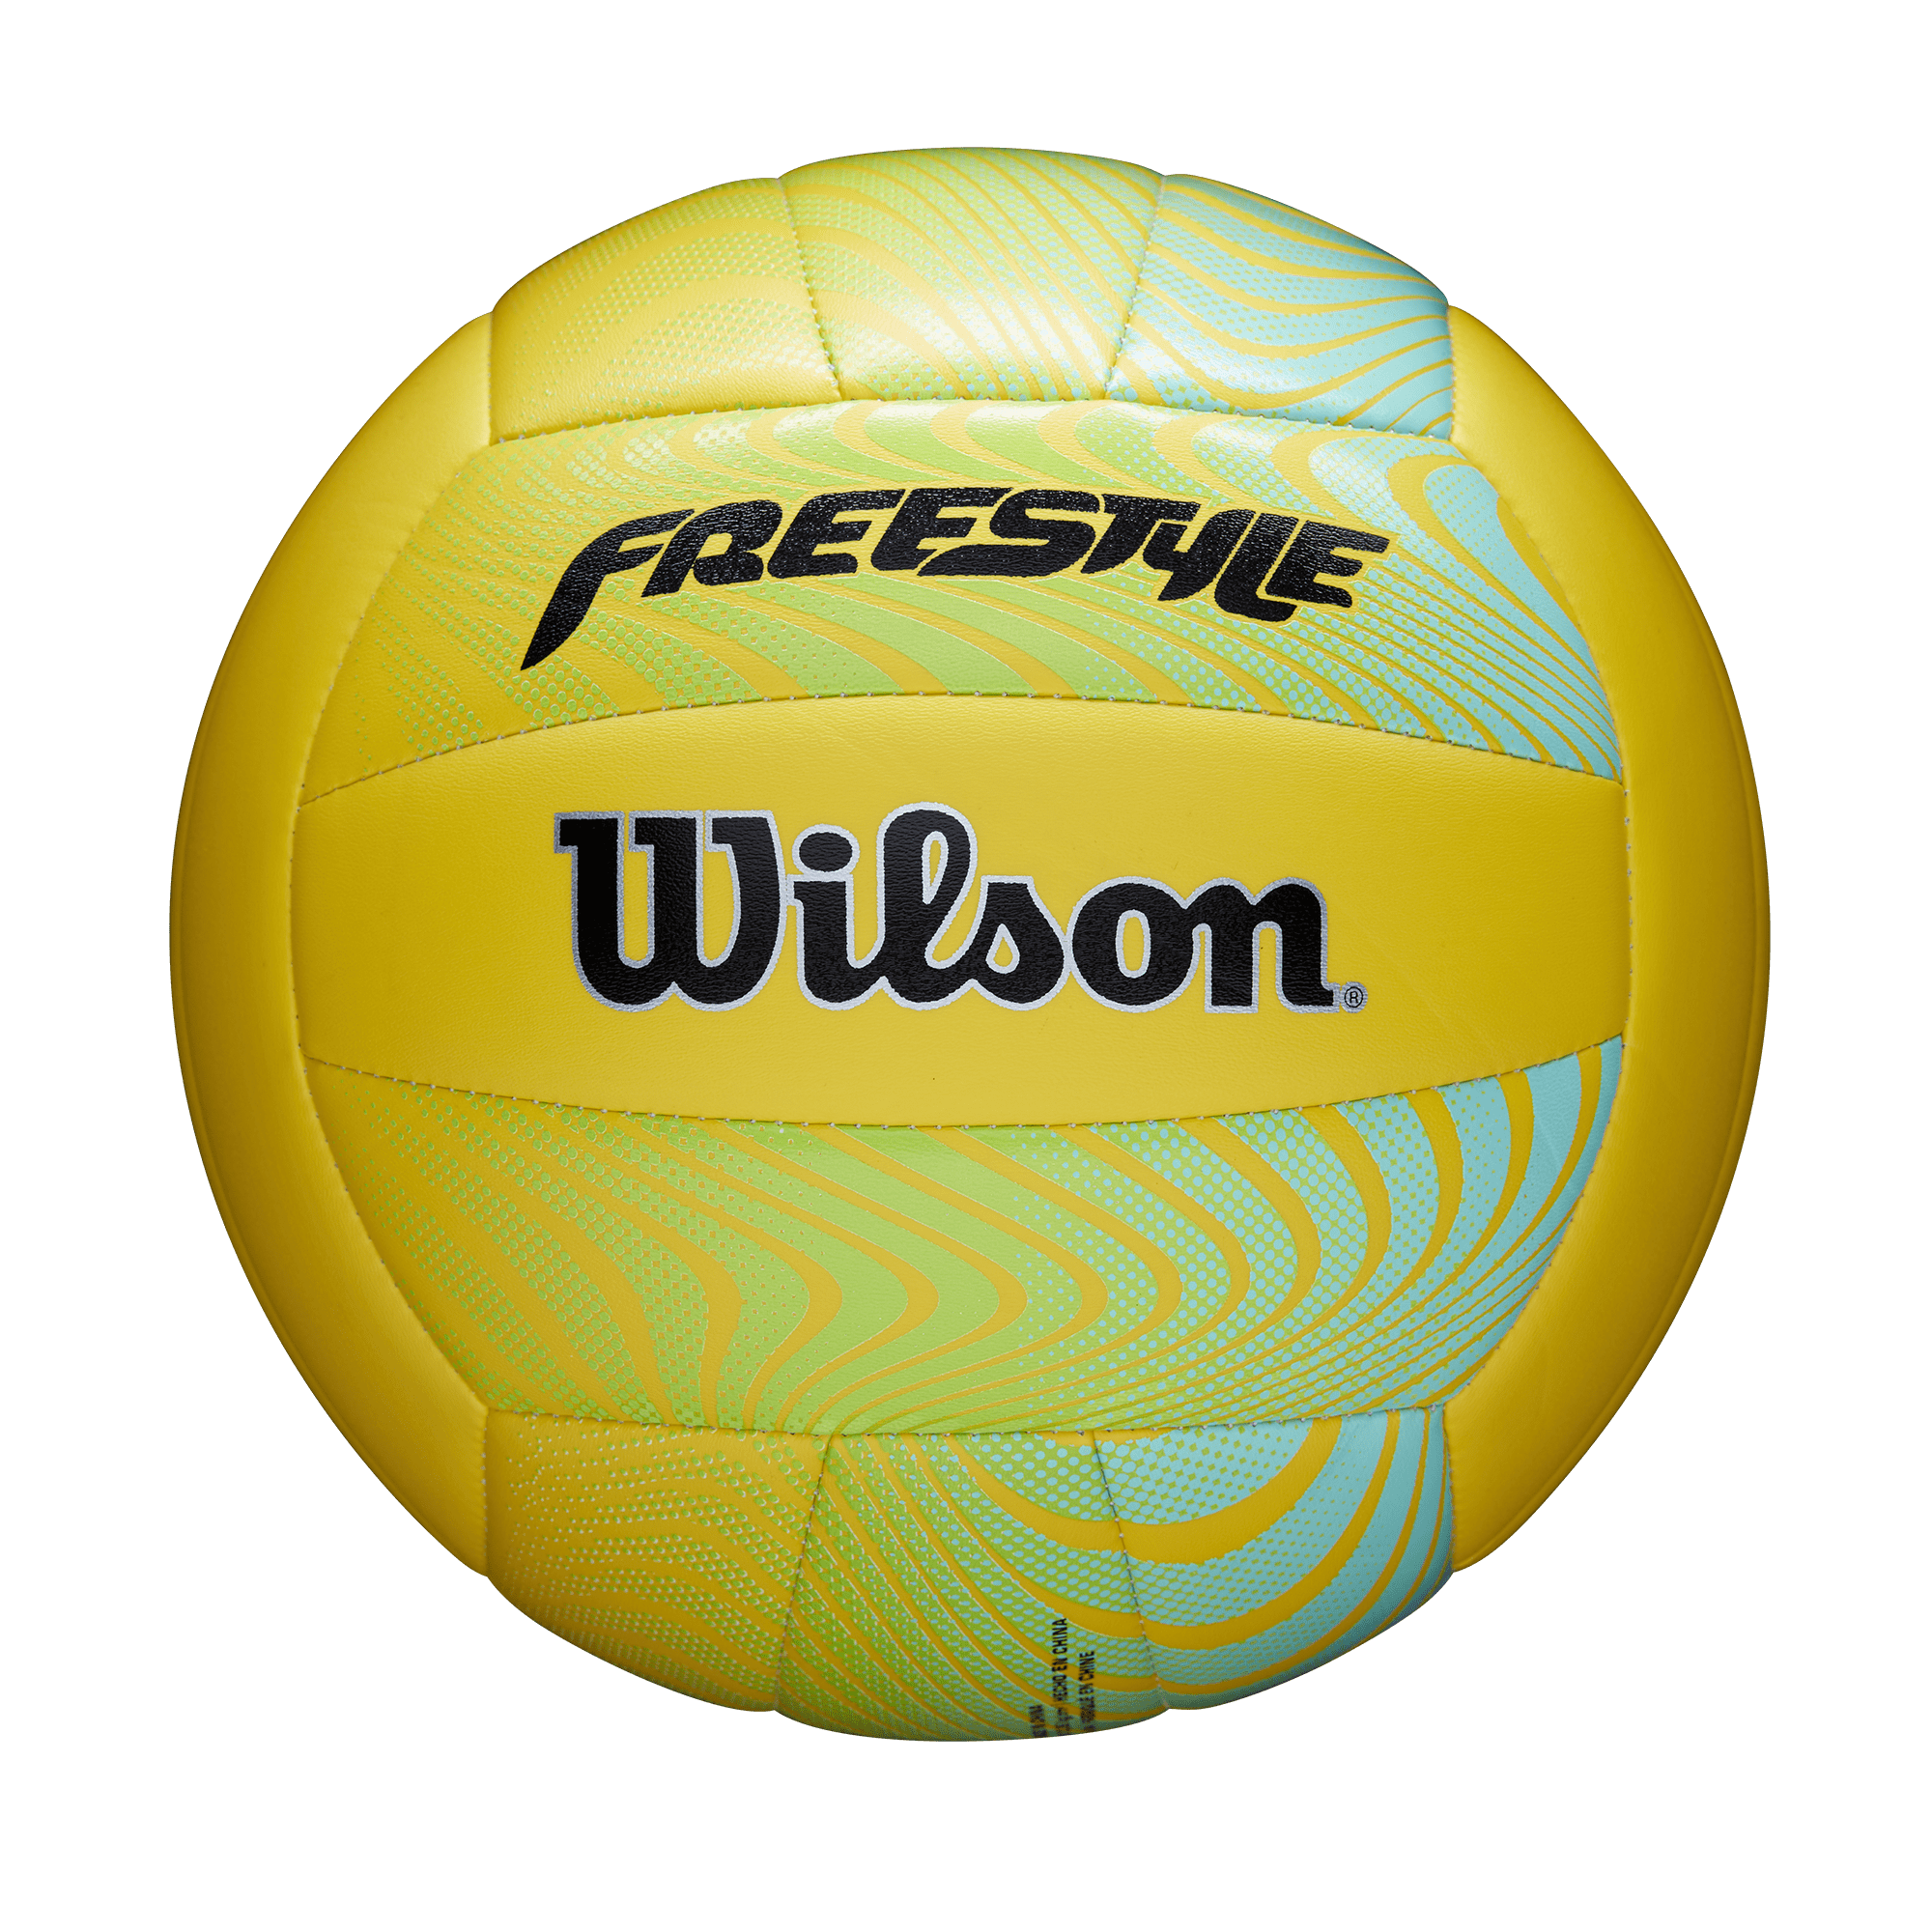 Wilson Soft Play Outdoor Volleyball White Wth3500 Aoi for sale online 